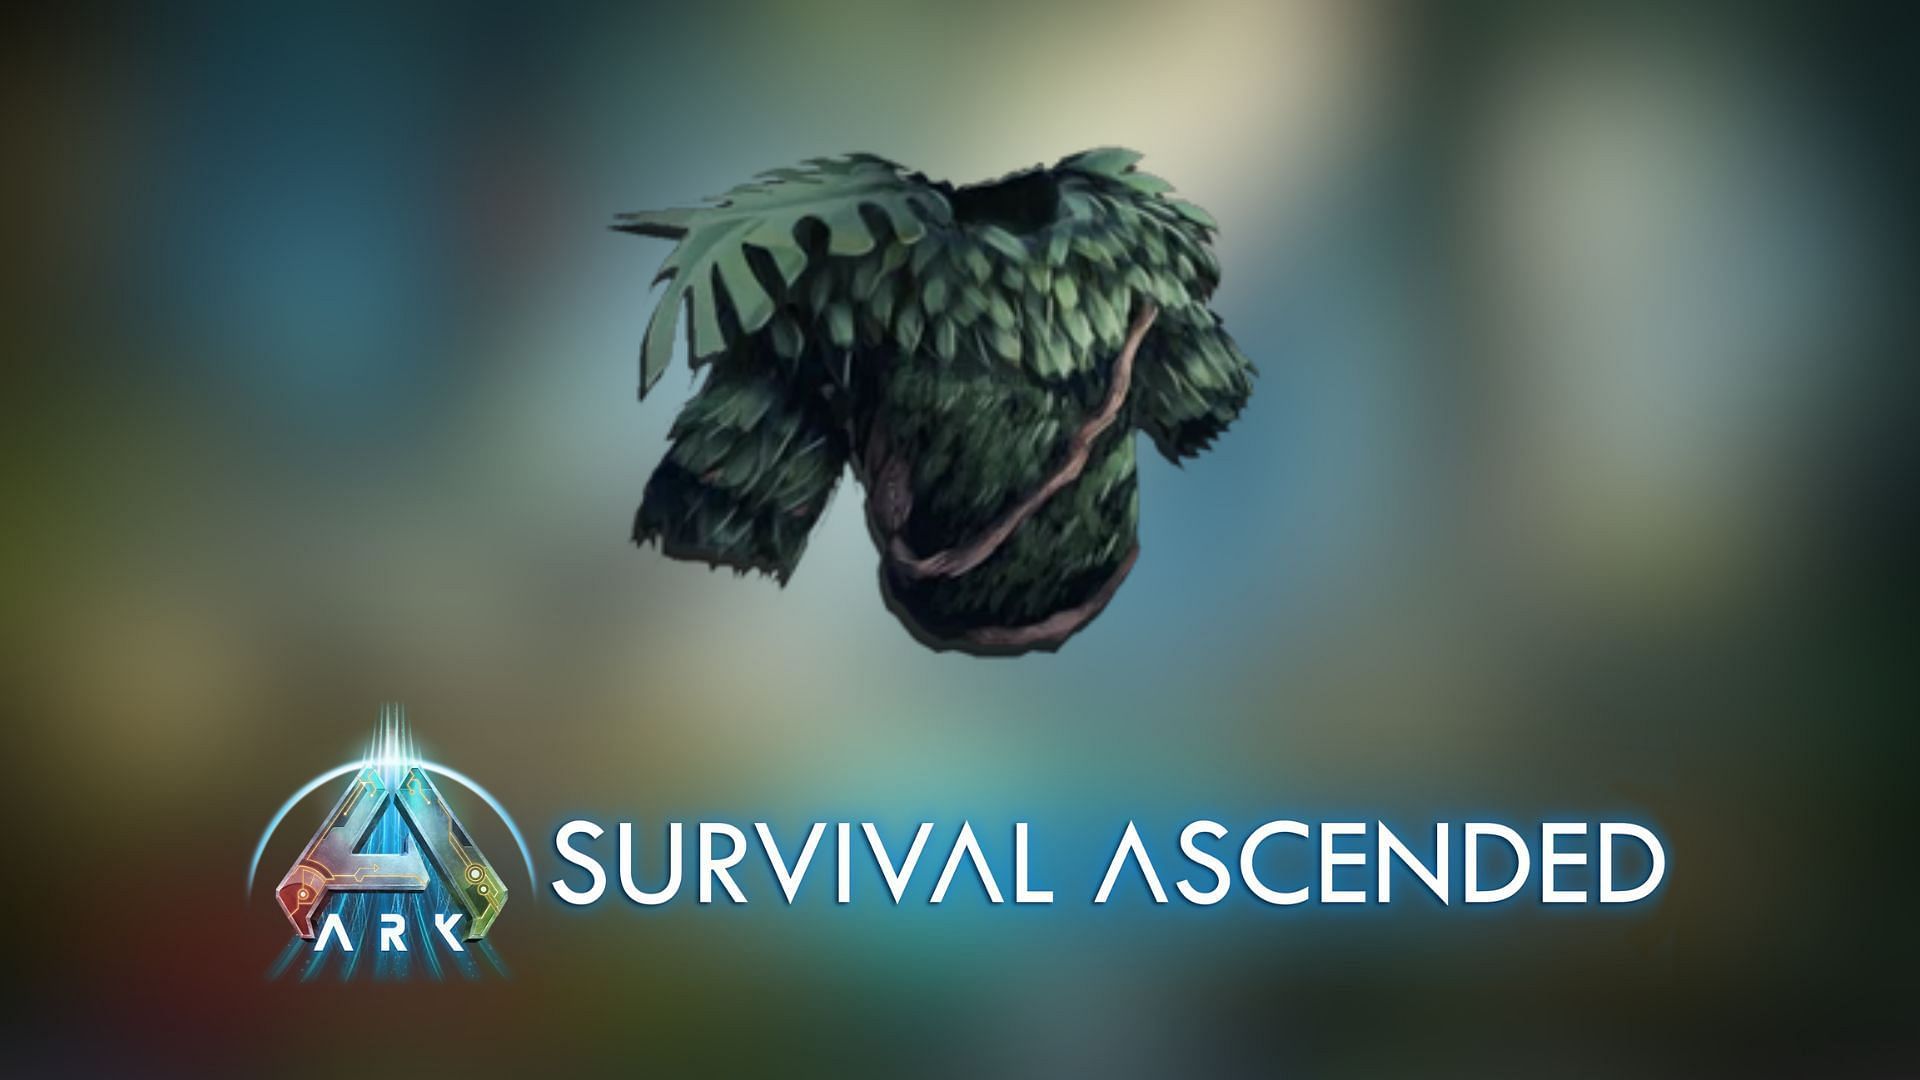 Ghillie armor can blend players with the environment in Ark Survival Ascended (Image via Studio Wildcard)